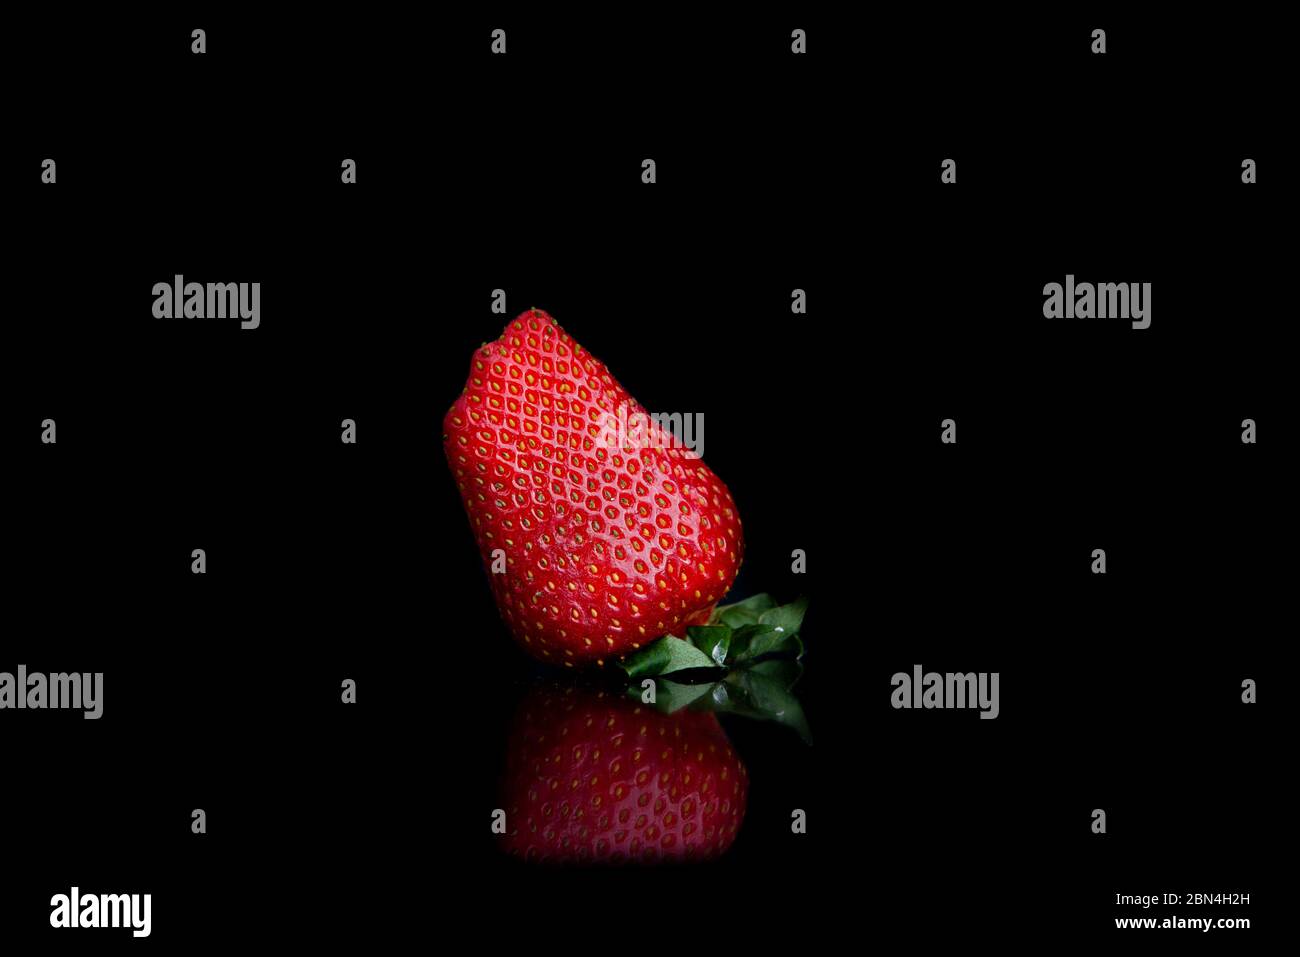 Giant fresh strawberries on a black background with copy space Stock Photo